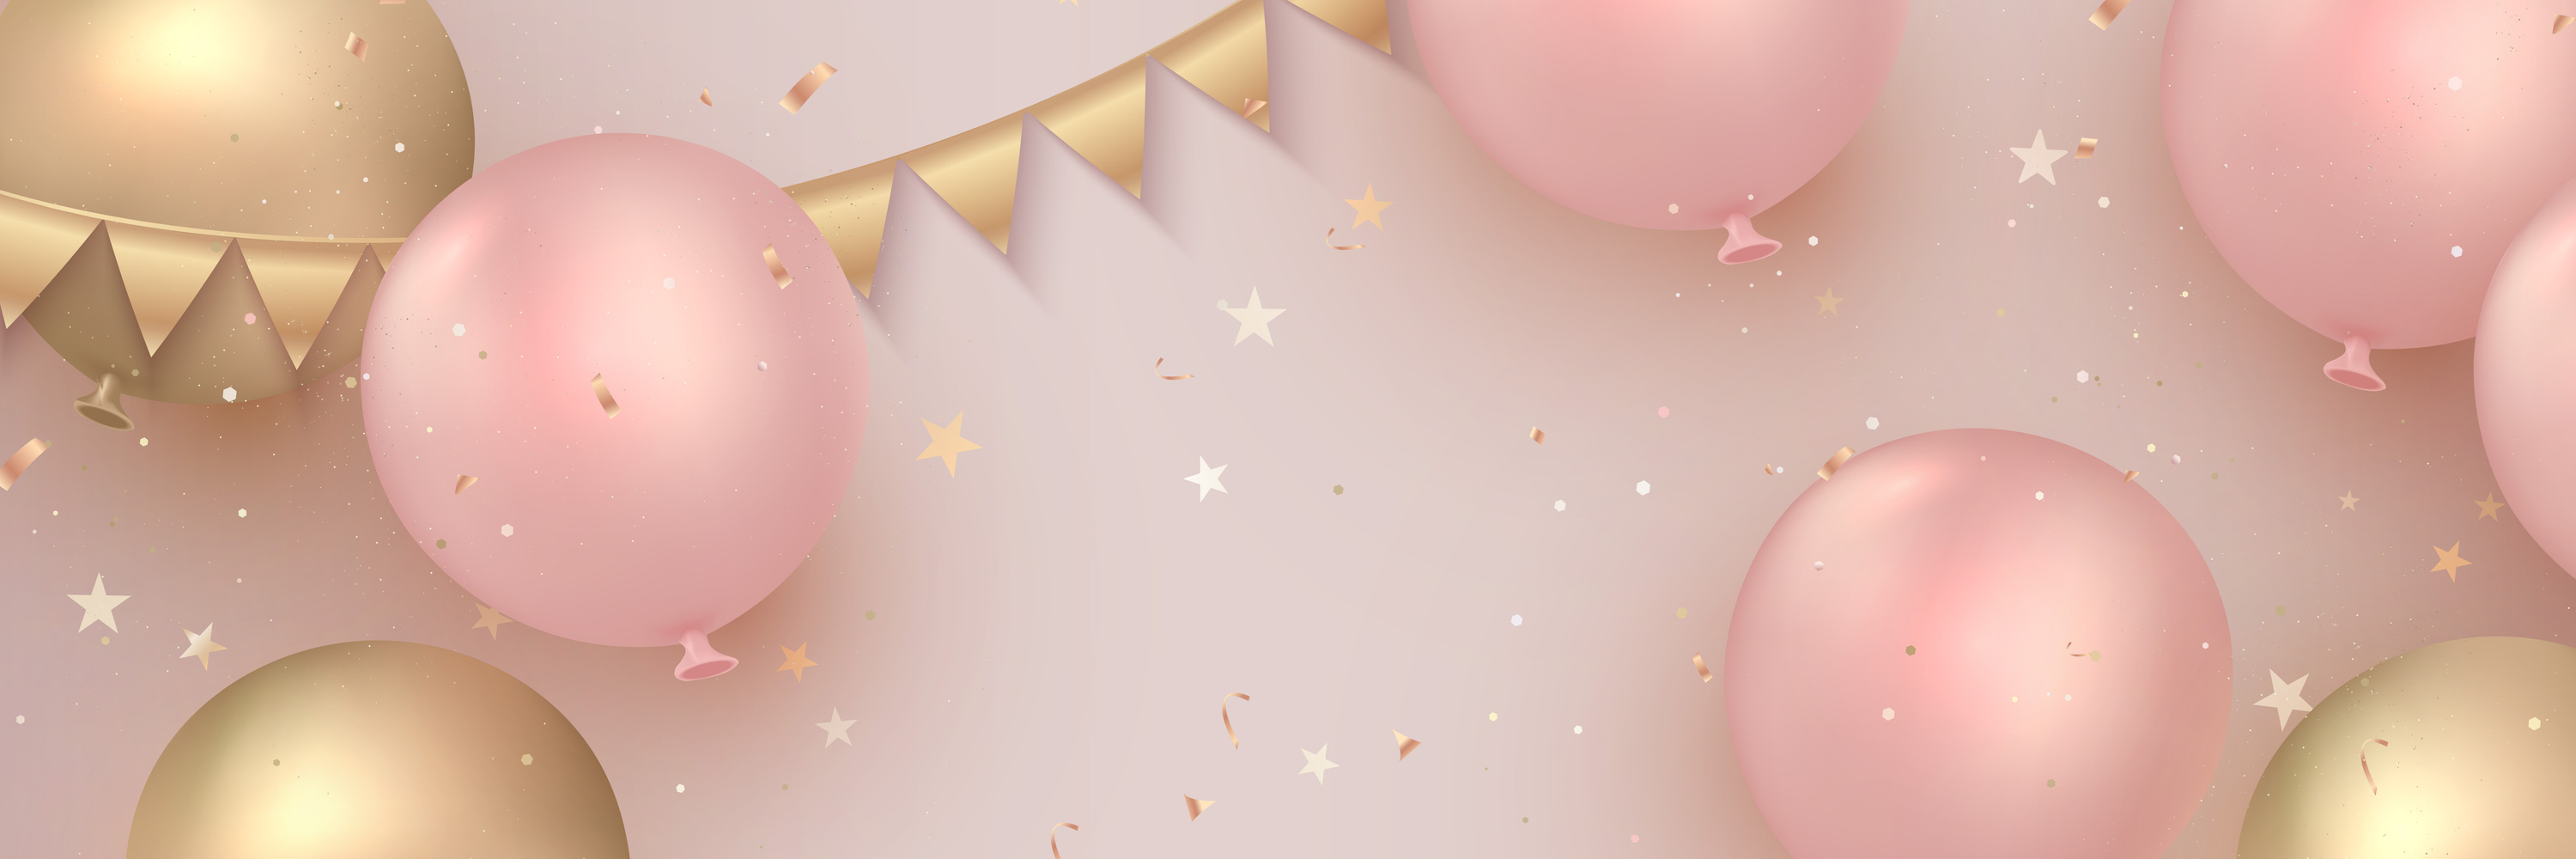 Confetti and Balloons on a Plain Background 